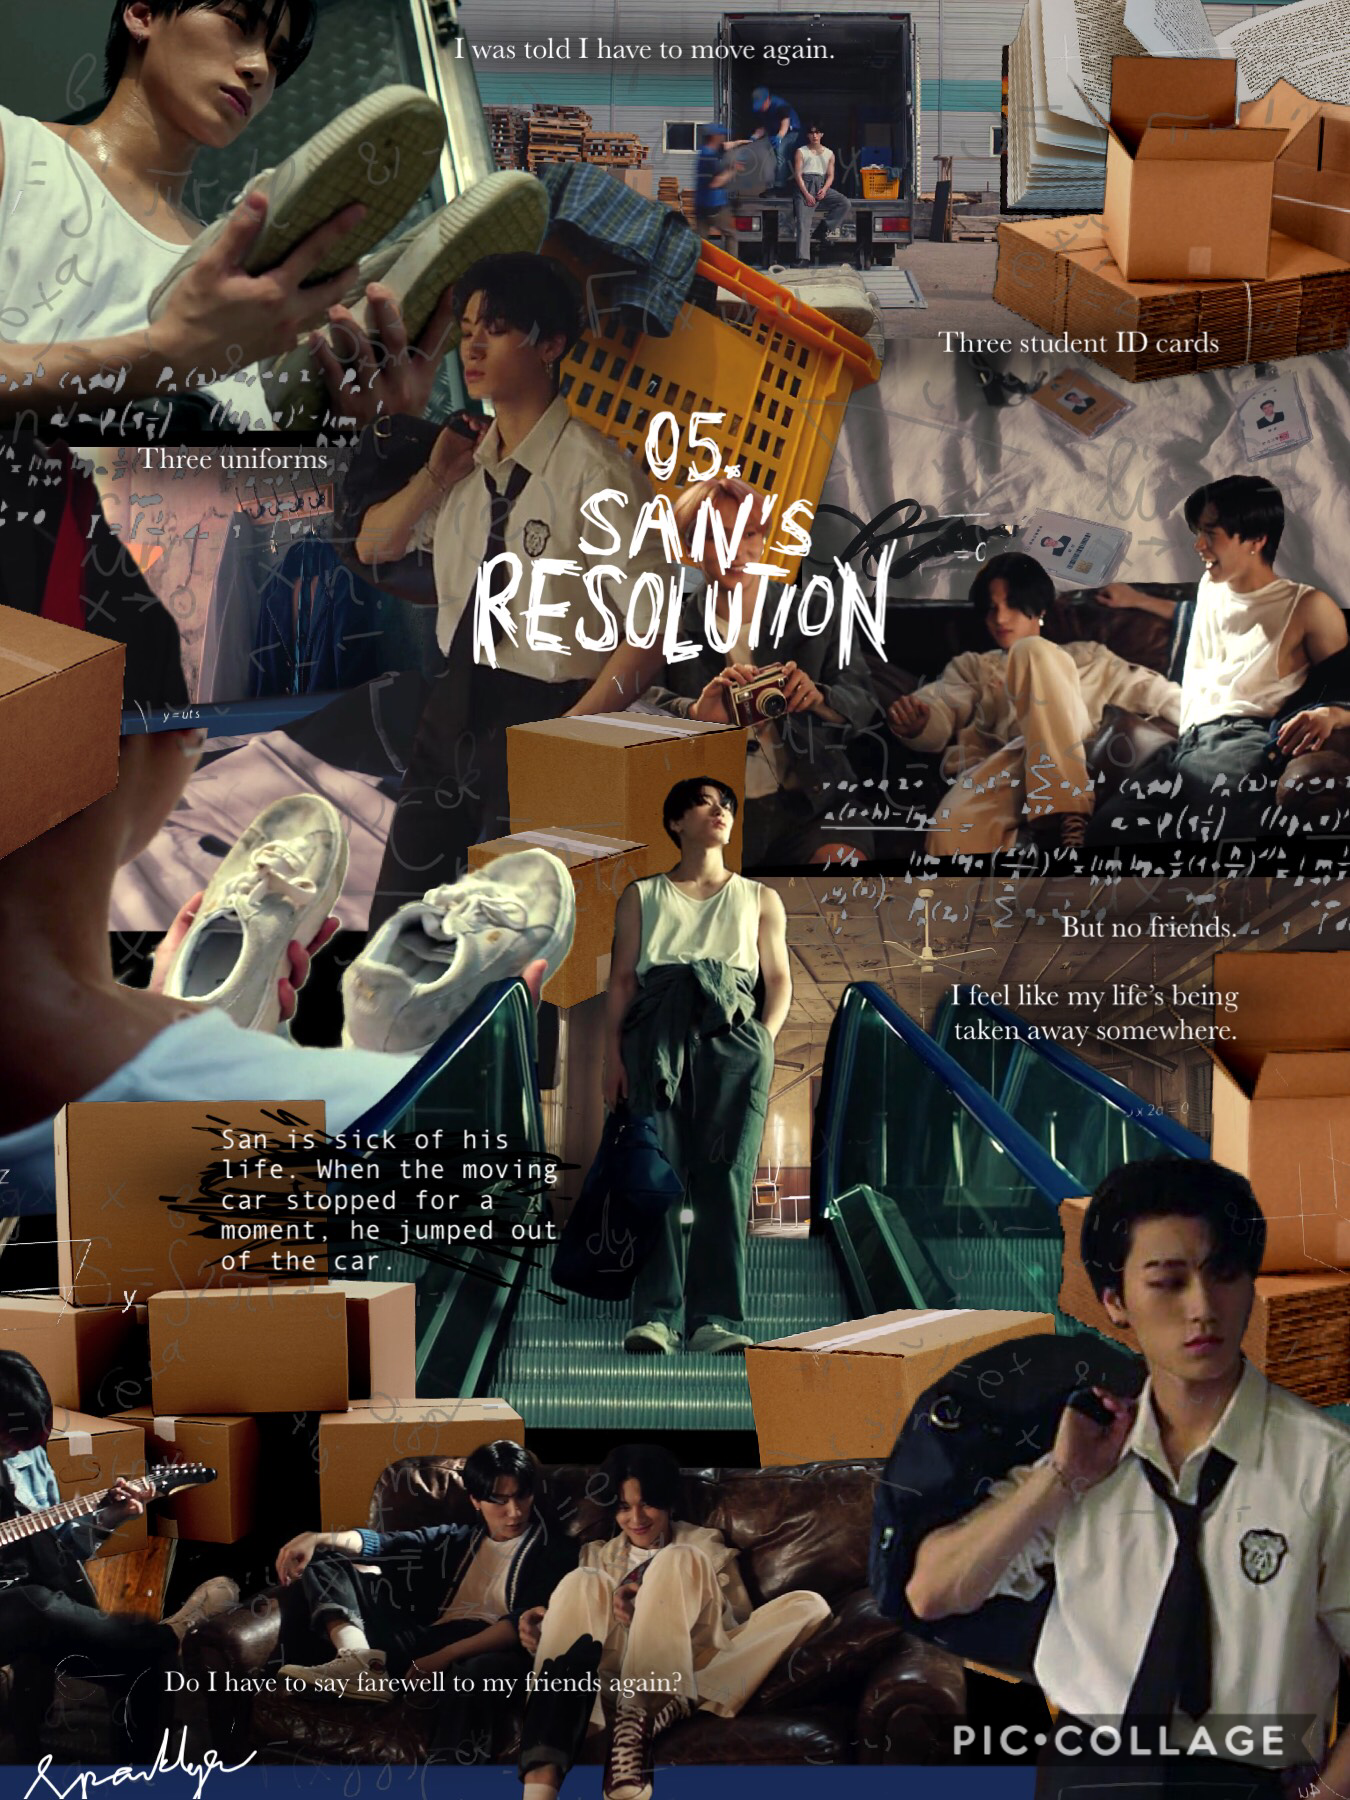 [6/10] 05. “San’s Resolution” | S’s resolution is to keep the guys’ friendship in tact. He can’t bear to lose them. He’s also the first to step in when Jongho& Mingi fight later &everything goes downhill. Idk what the shoes could mean though??